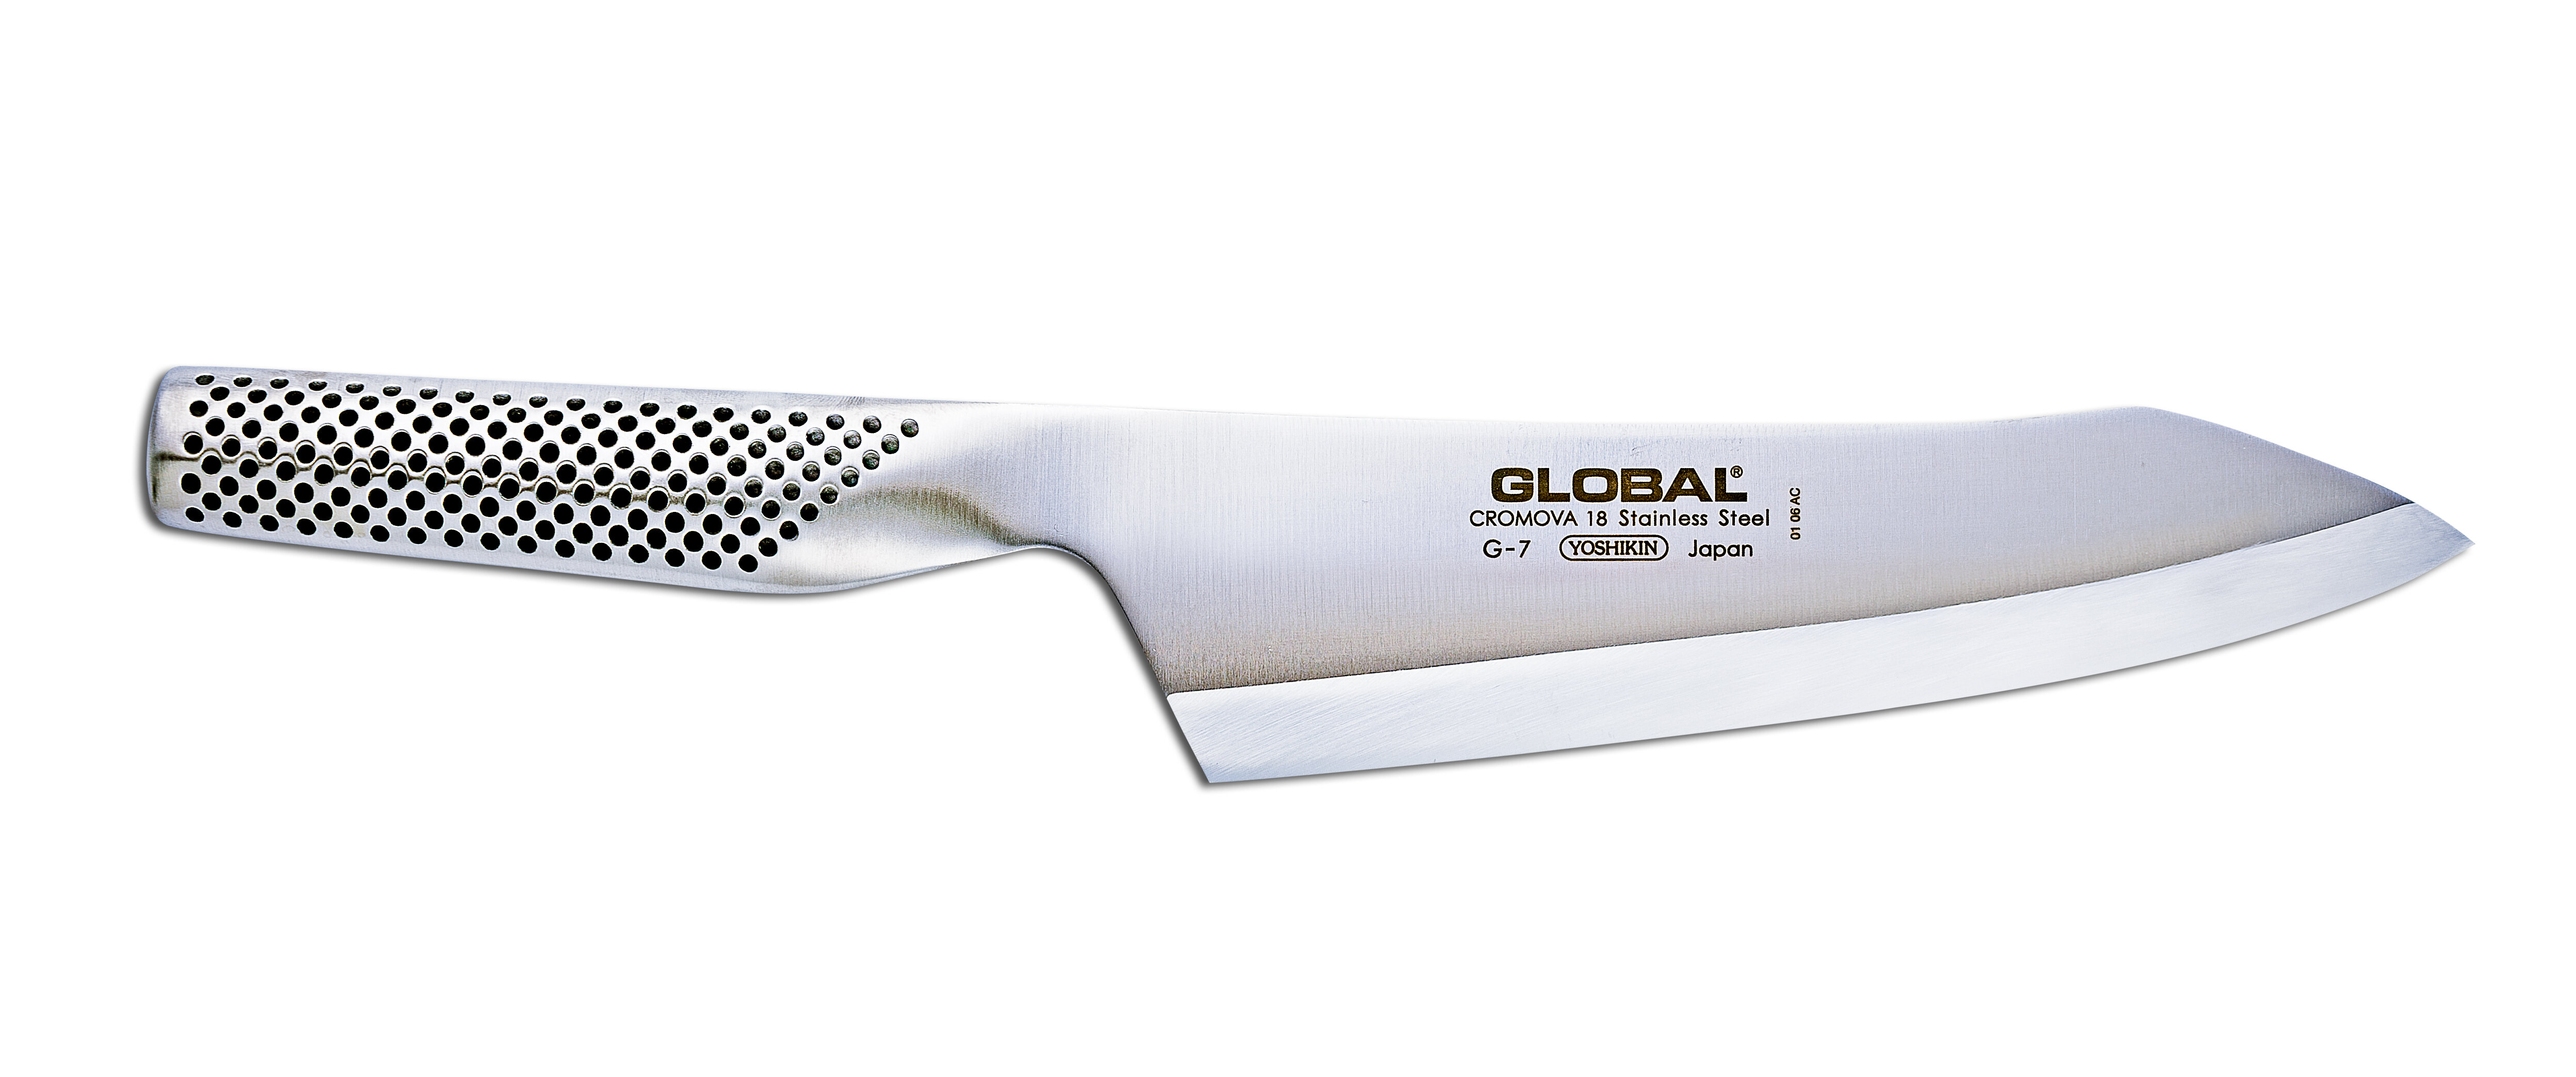 Global Knives Classic Kitchen Shears & Scissors & Reviews